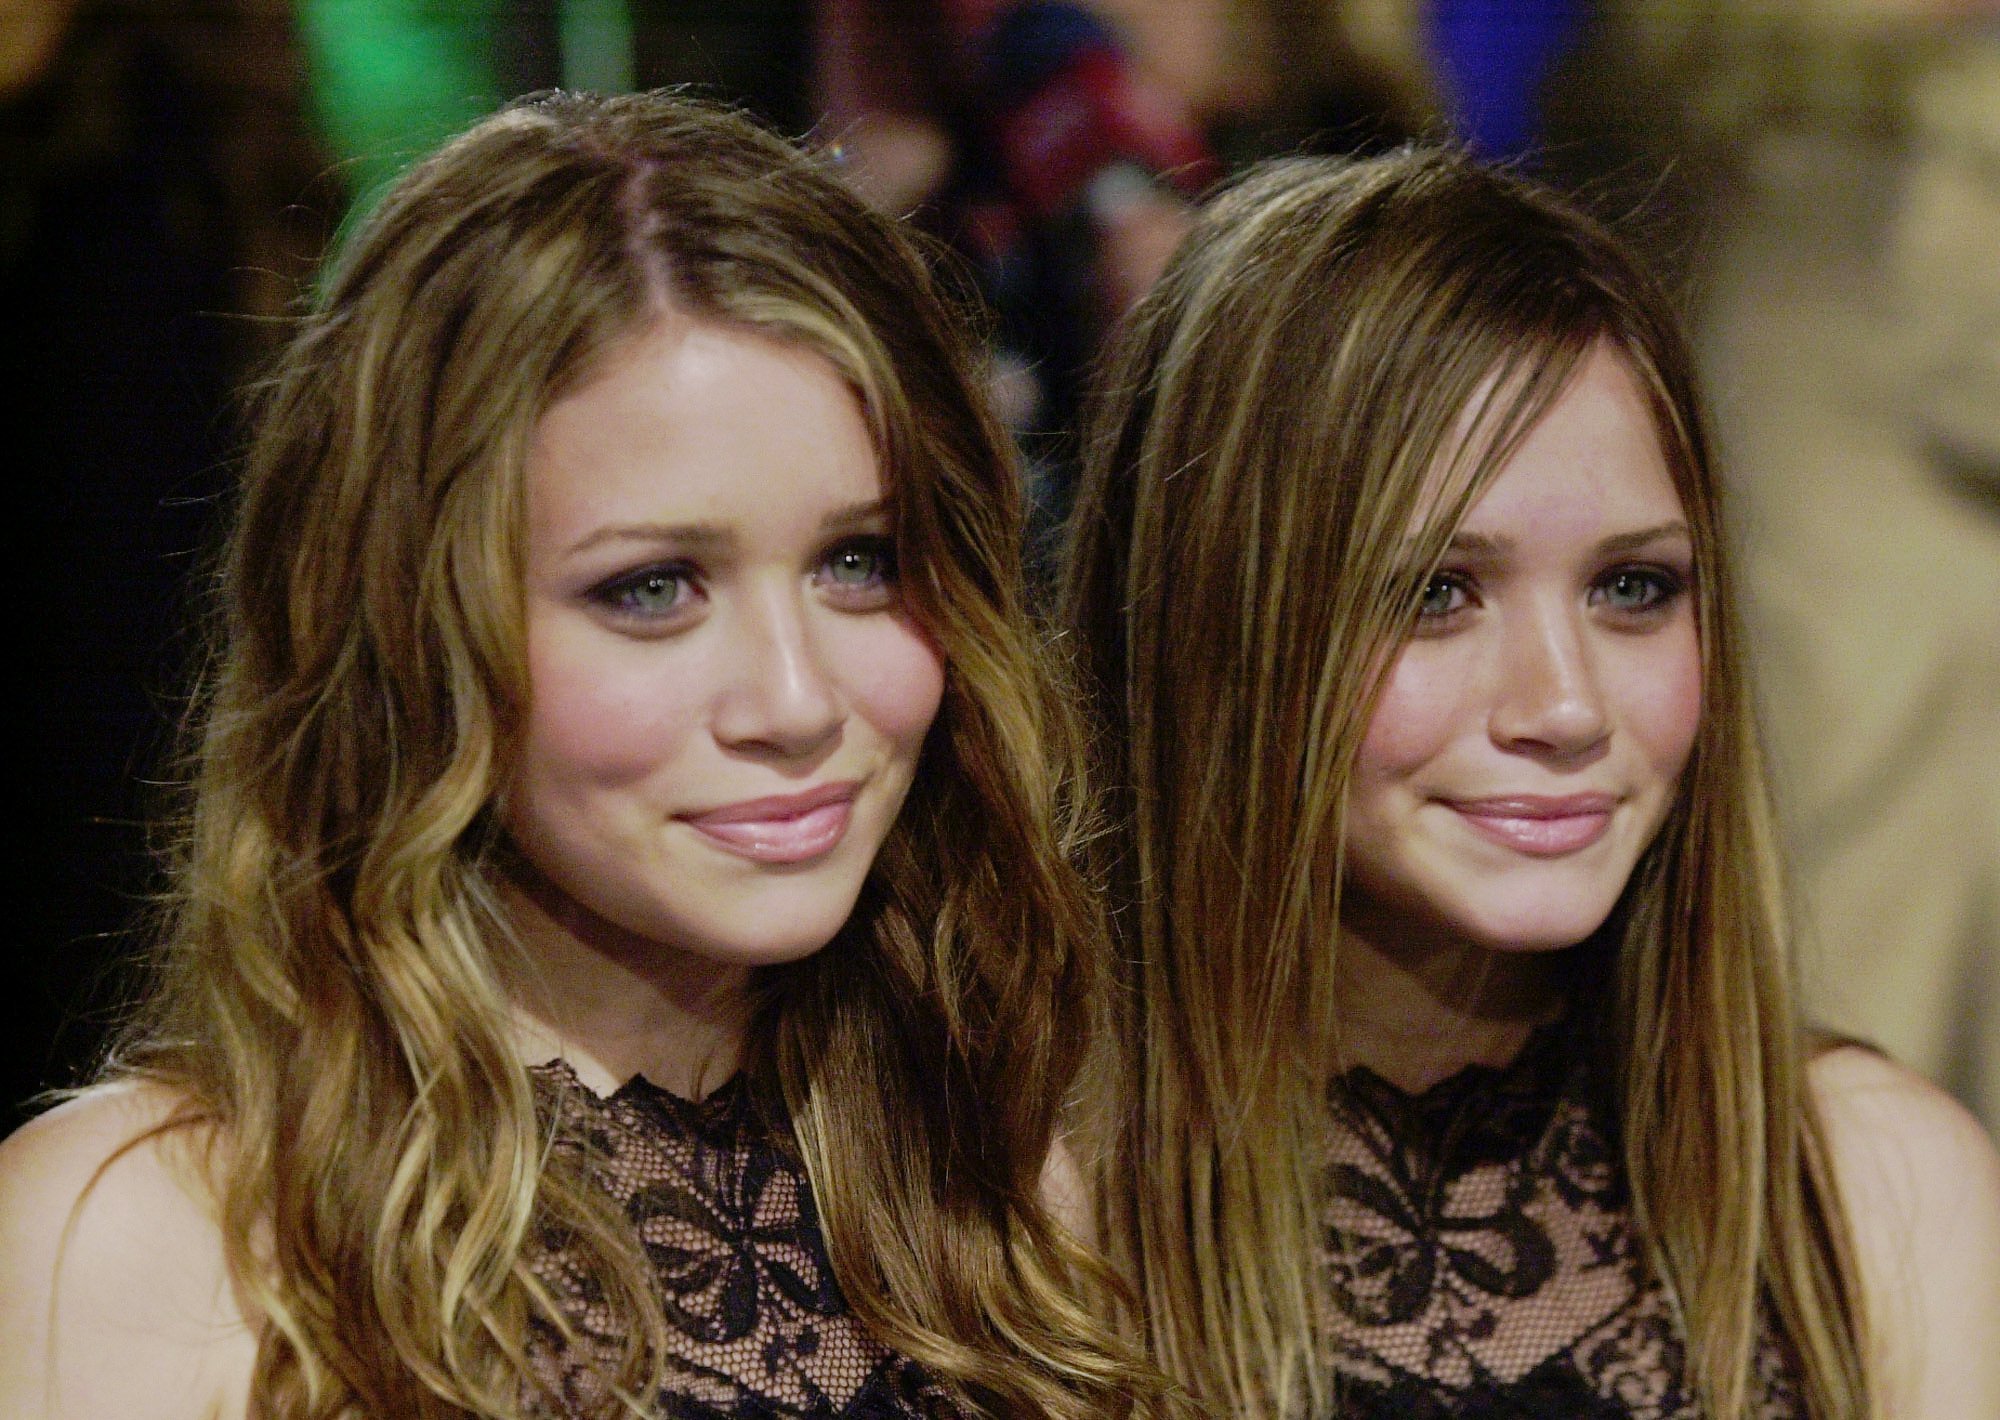 How the Olsen twins stole the show on 'Full House' - Chicago Tribune